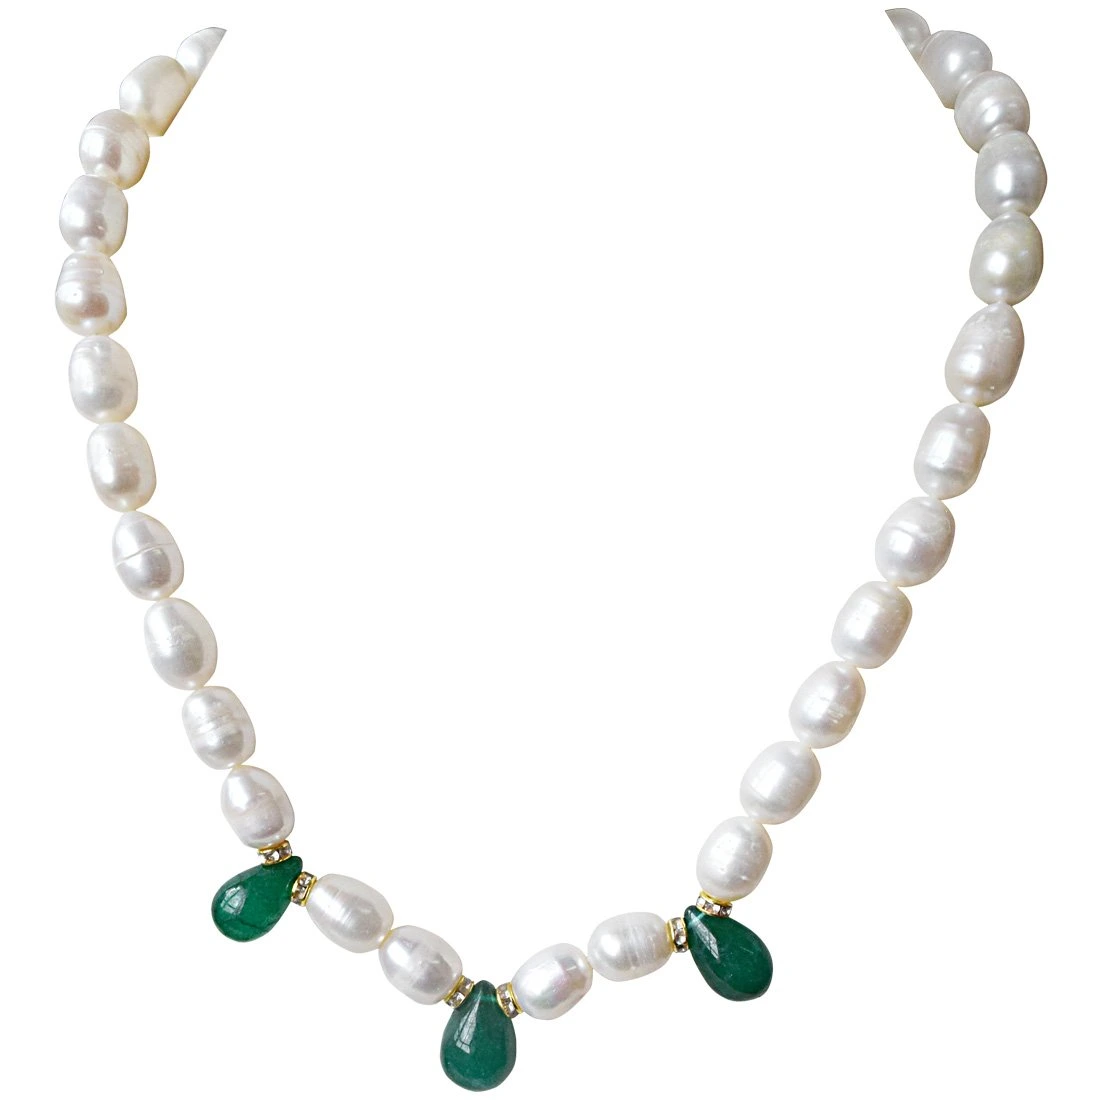 Single Line Drop Green Onyx, Stone Ring and Big Elongated Pearl Necklace for Women (SN916)